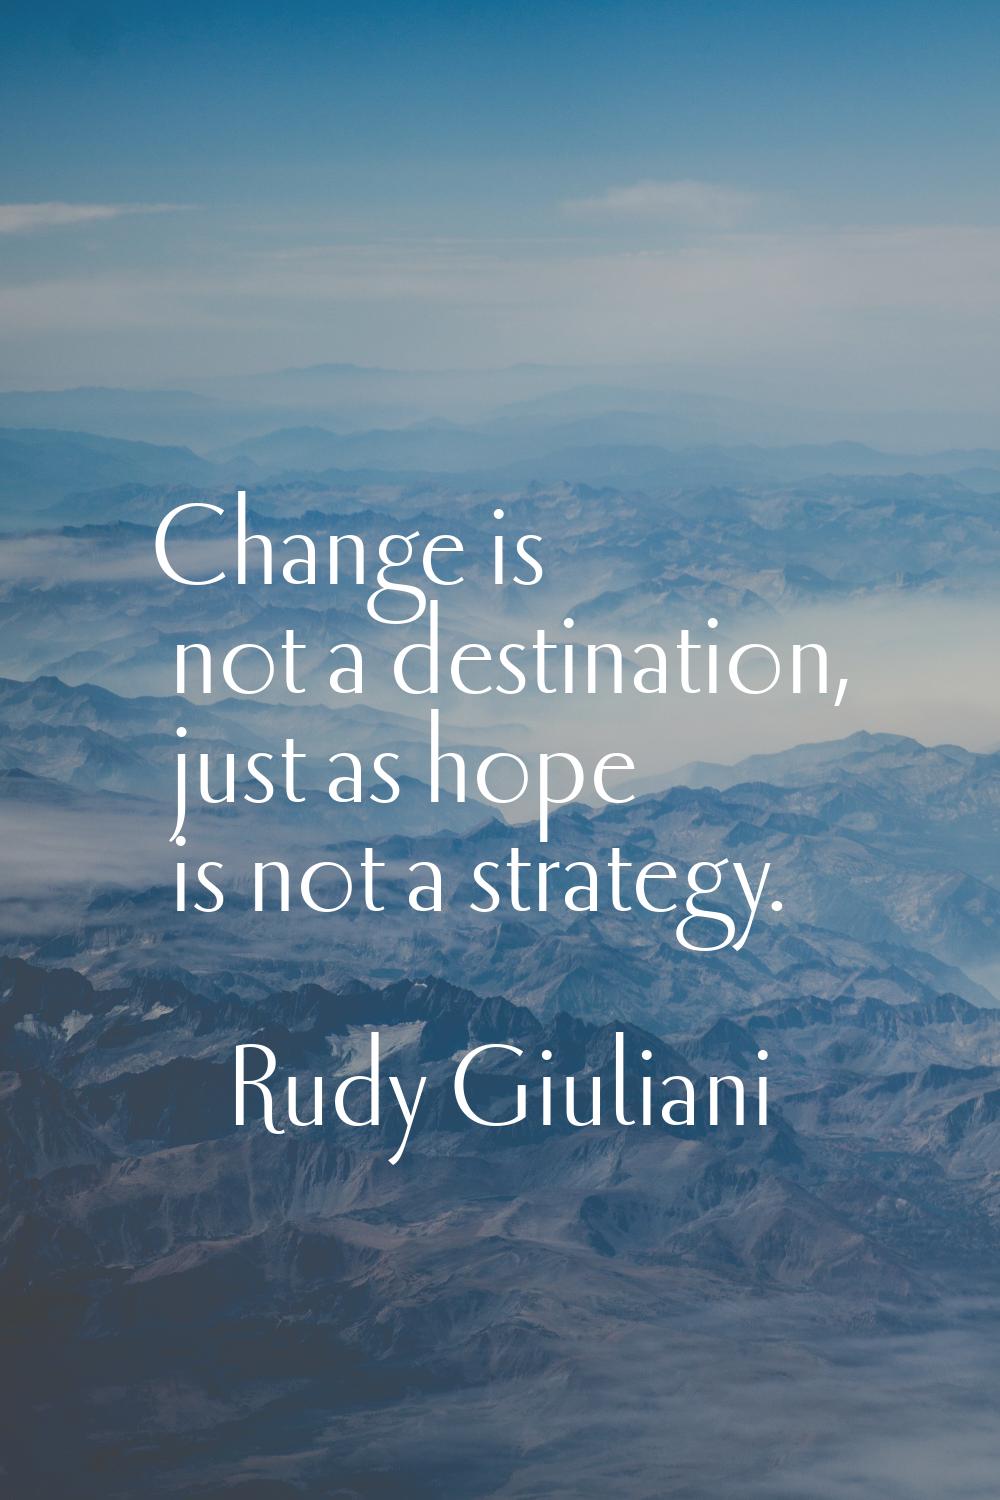 Change is not a destination, just as hope is not a strategy.